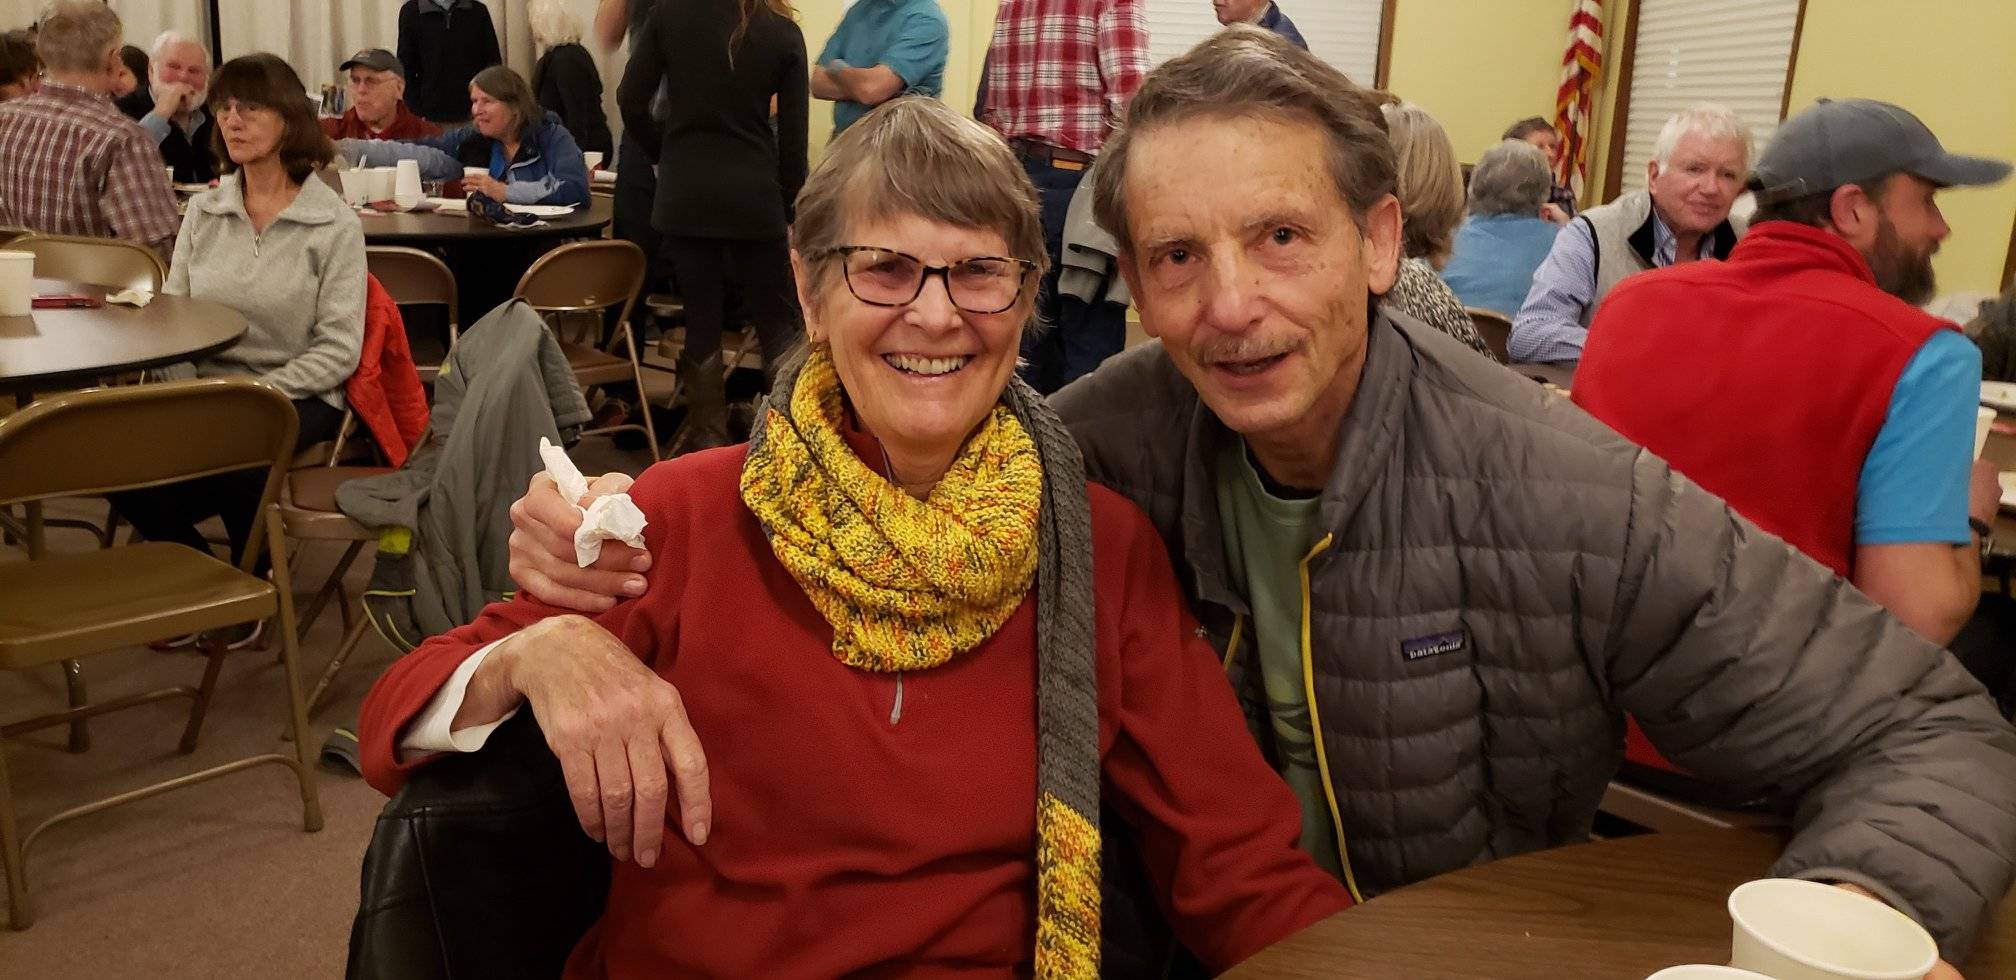 Lynn and Blake Willeford at the 2019 Hearts and Hammers spaghetti dinner. Lynn Willeford passed away last Sunday after a three-year right with brain cancer. She will be missed by many. Photo provided.